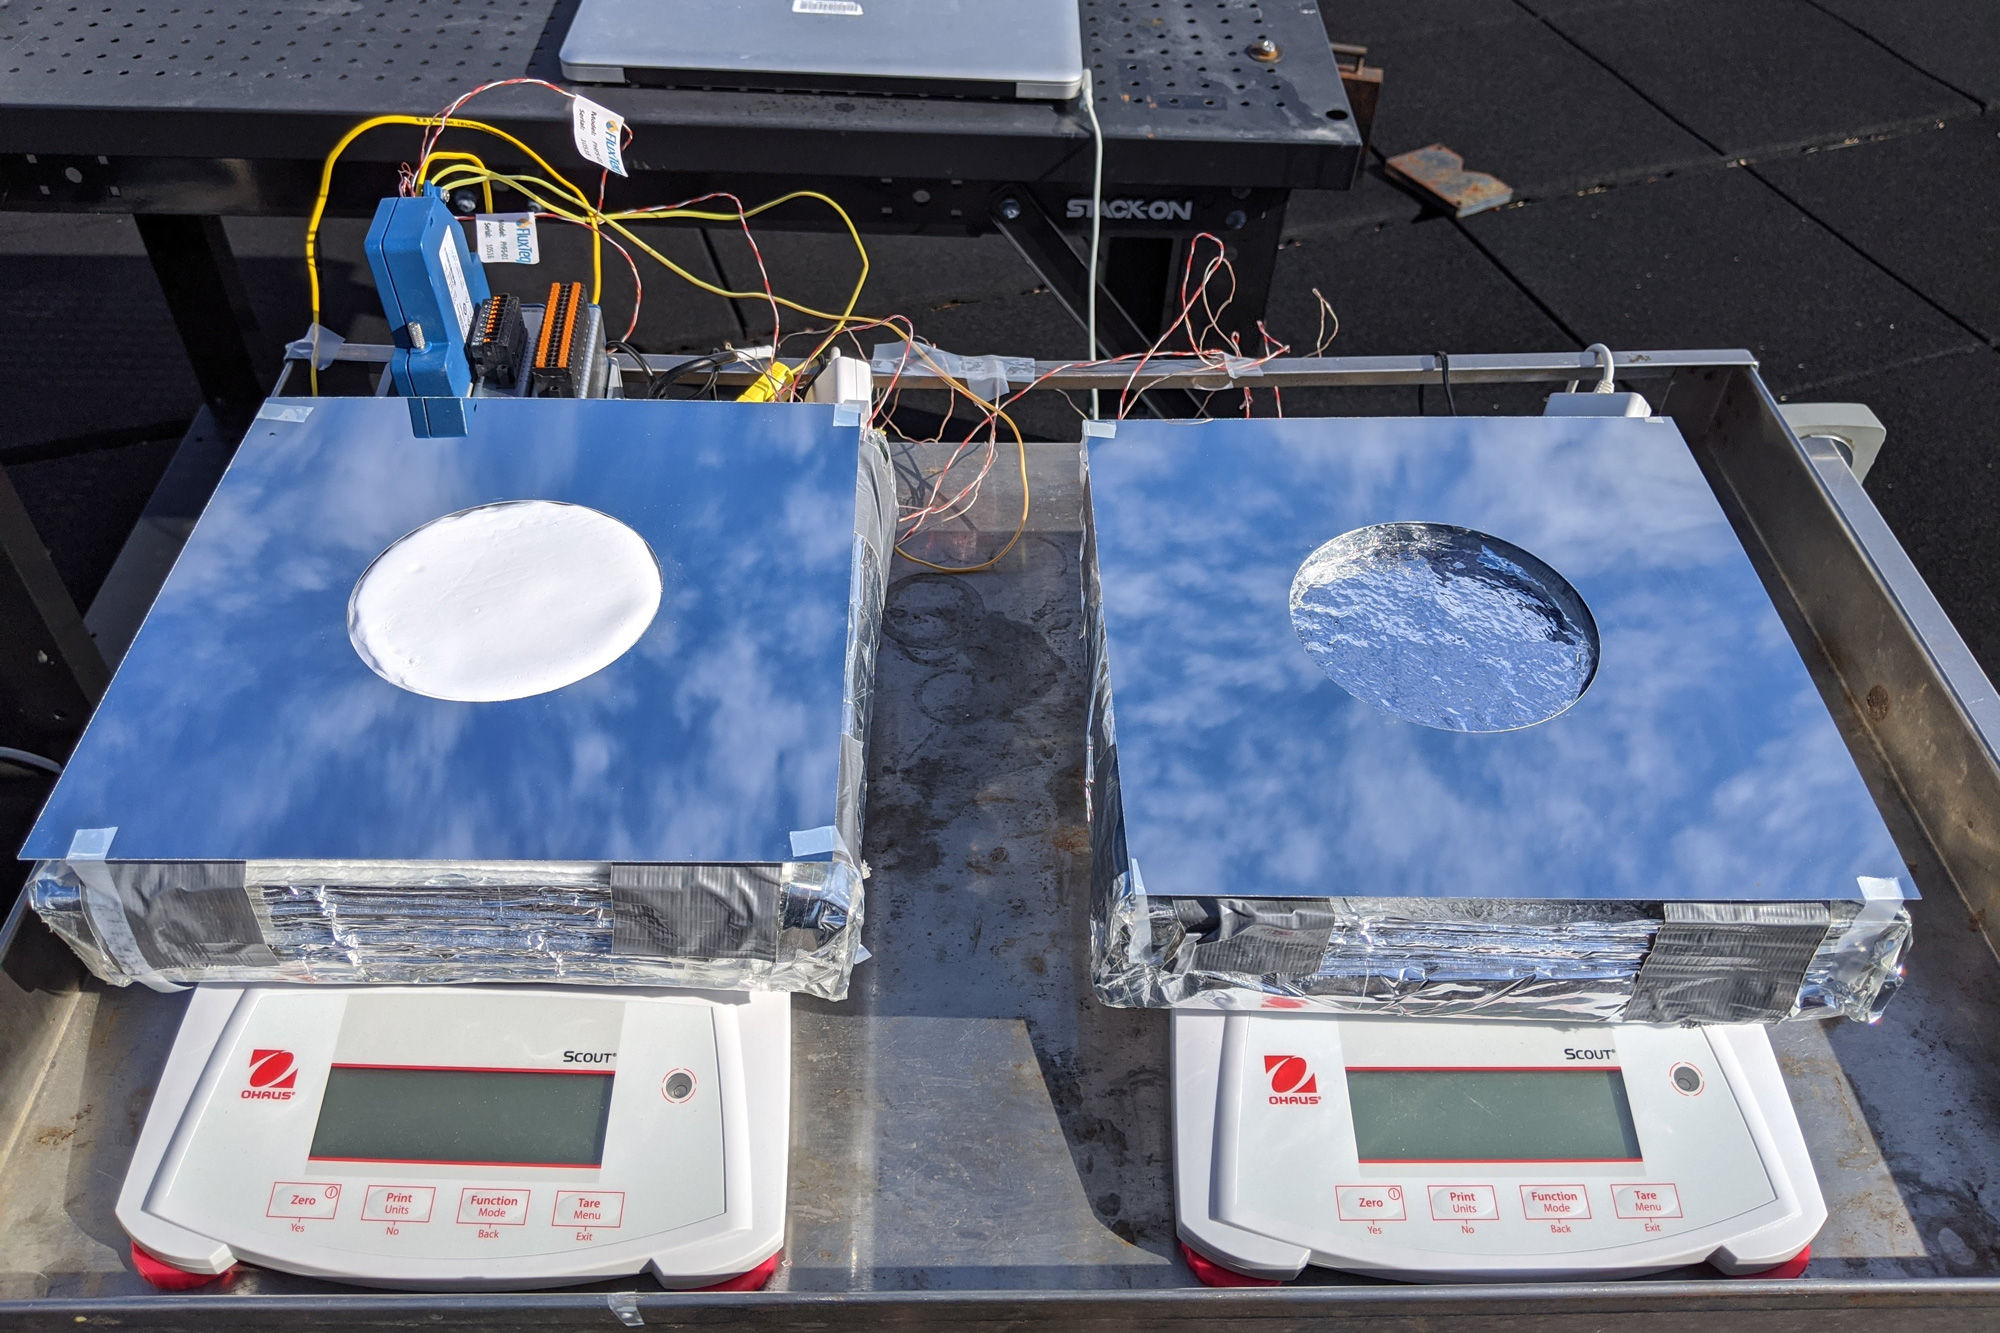 Passive cooling system could benefit off-grid locations, MIT News